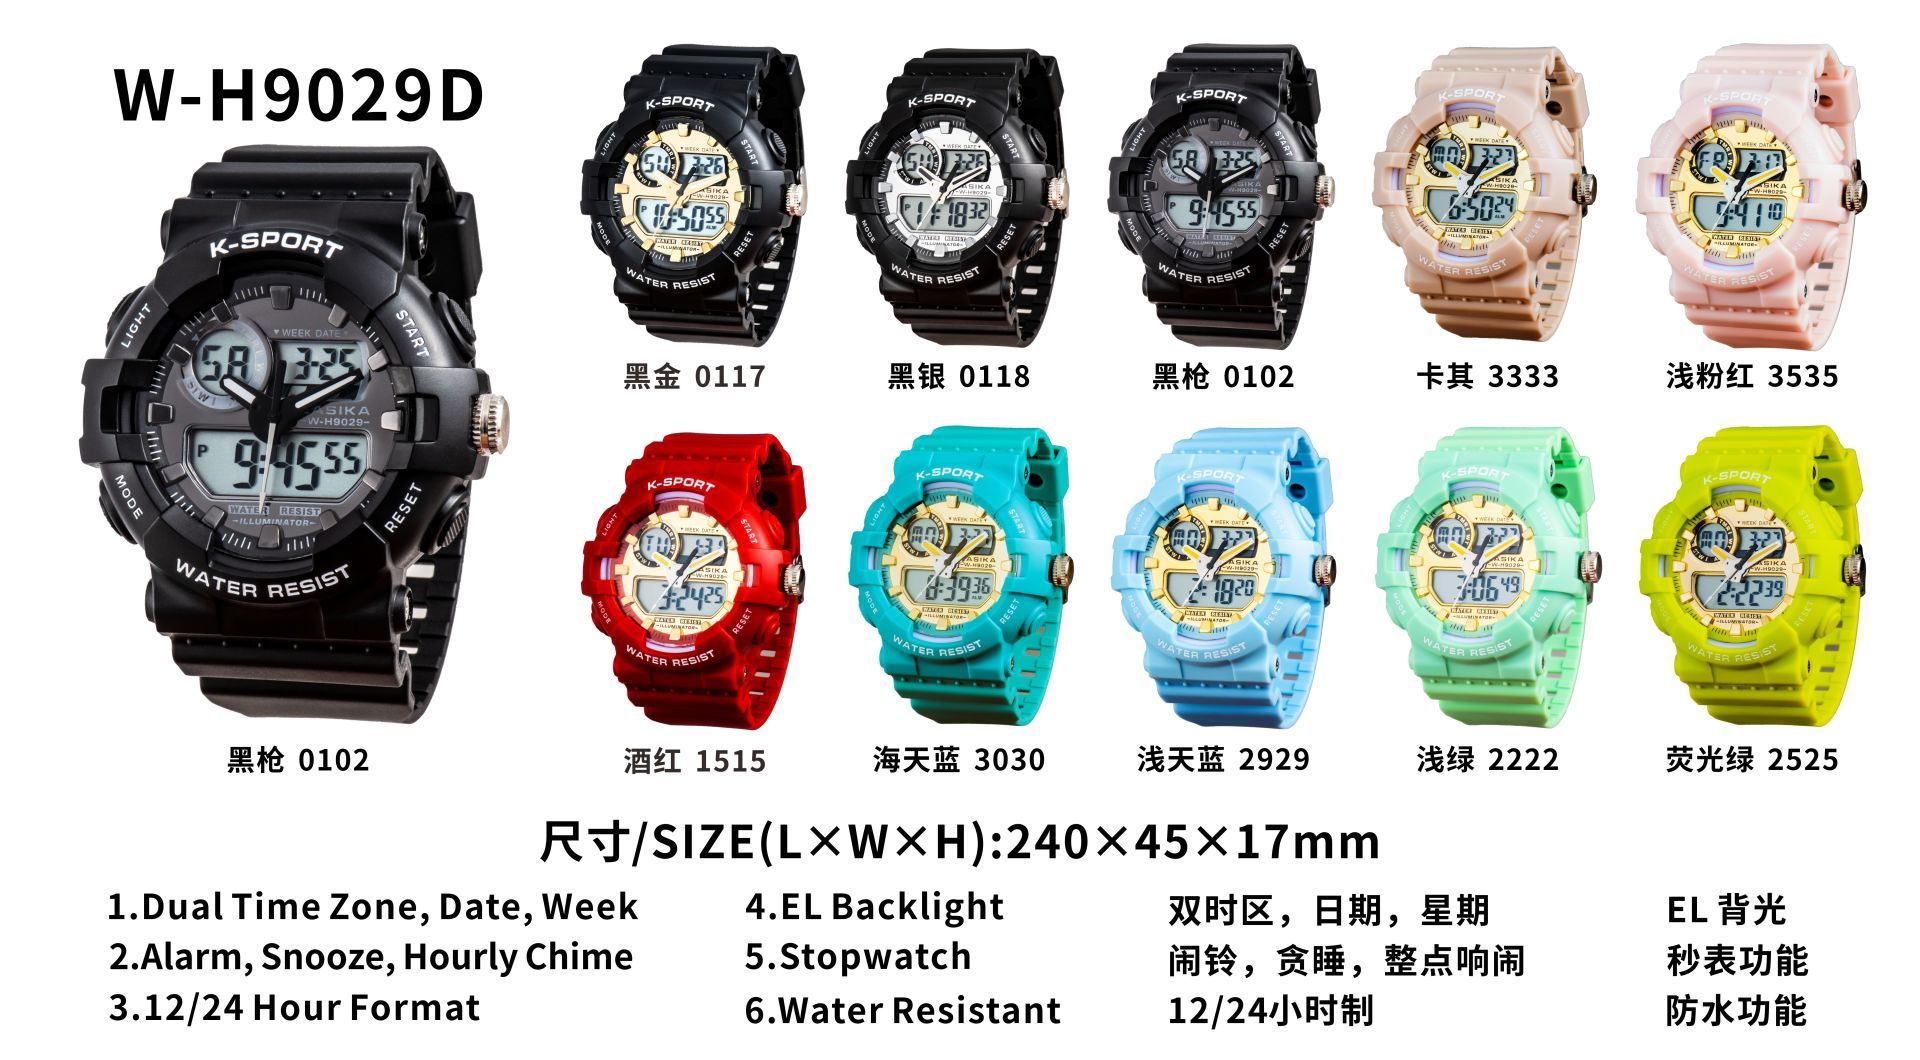 Do you want to learn more about the stylish customized Analog Digital Watch material